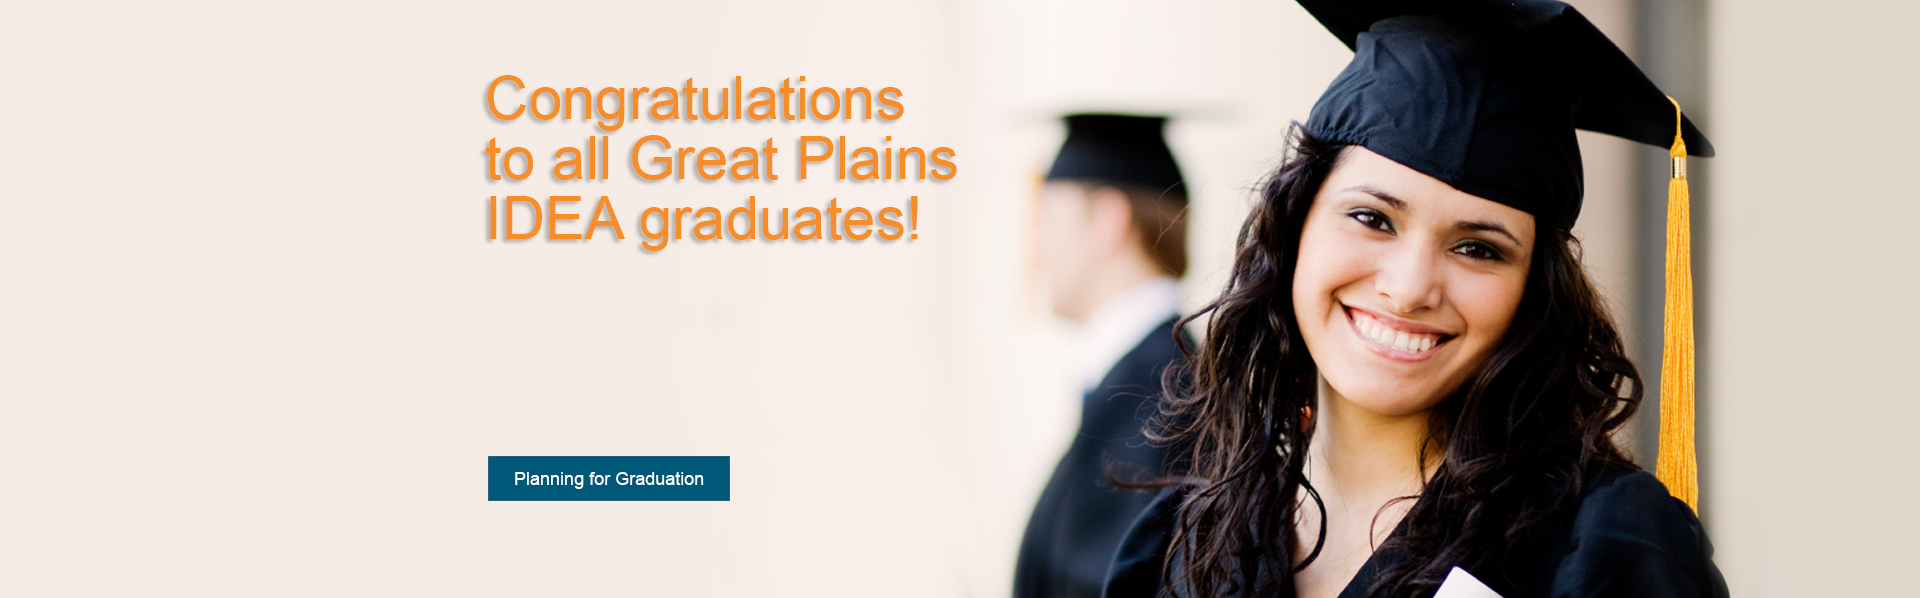 Review our checklists to help prepare for graduation from a bachelors or master’s program.  Photo description: A young Latina woman smiles at the camera while wearing a black graduation cap and gown.